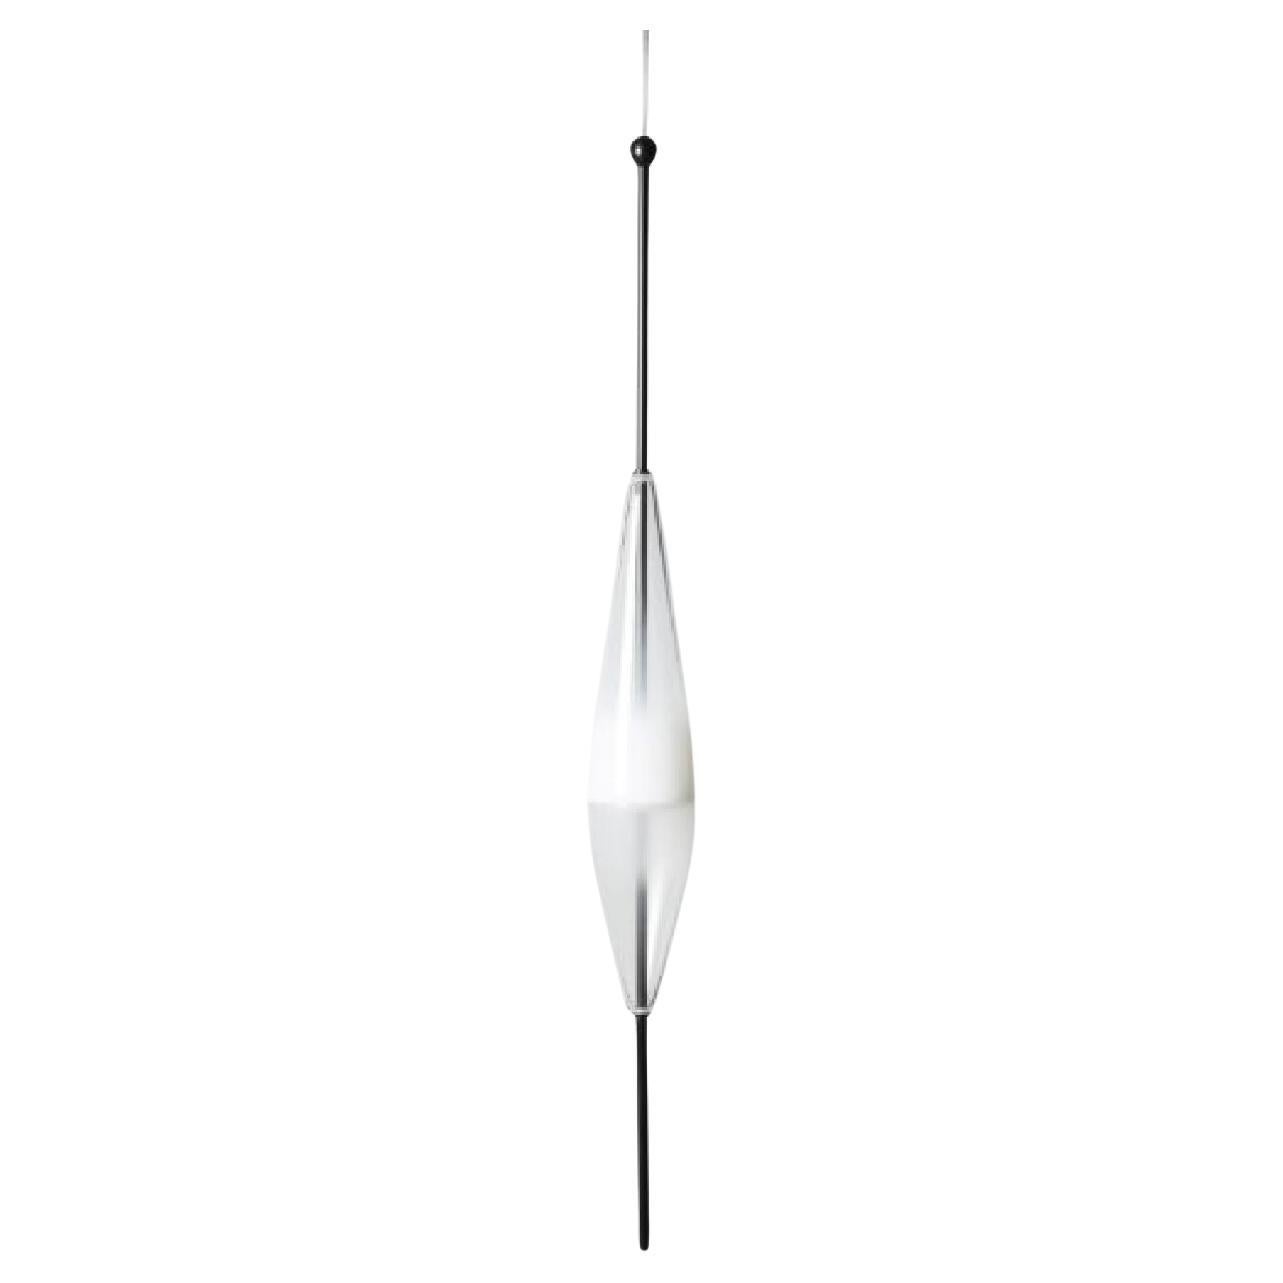 FLOW[T] S3 Pendant lamp in White by Nao Tamura for Wonderglass For Sale